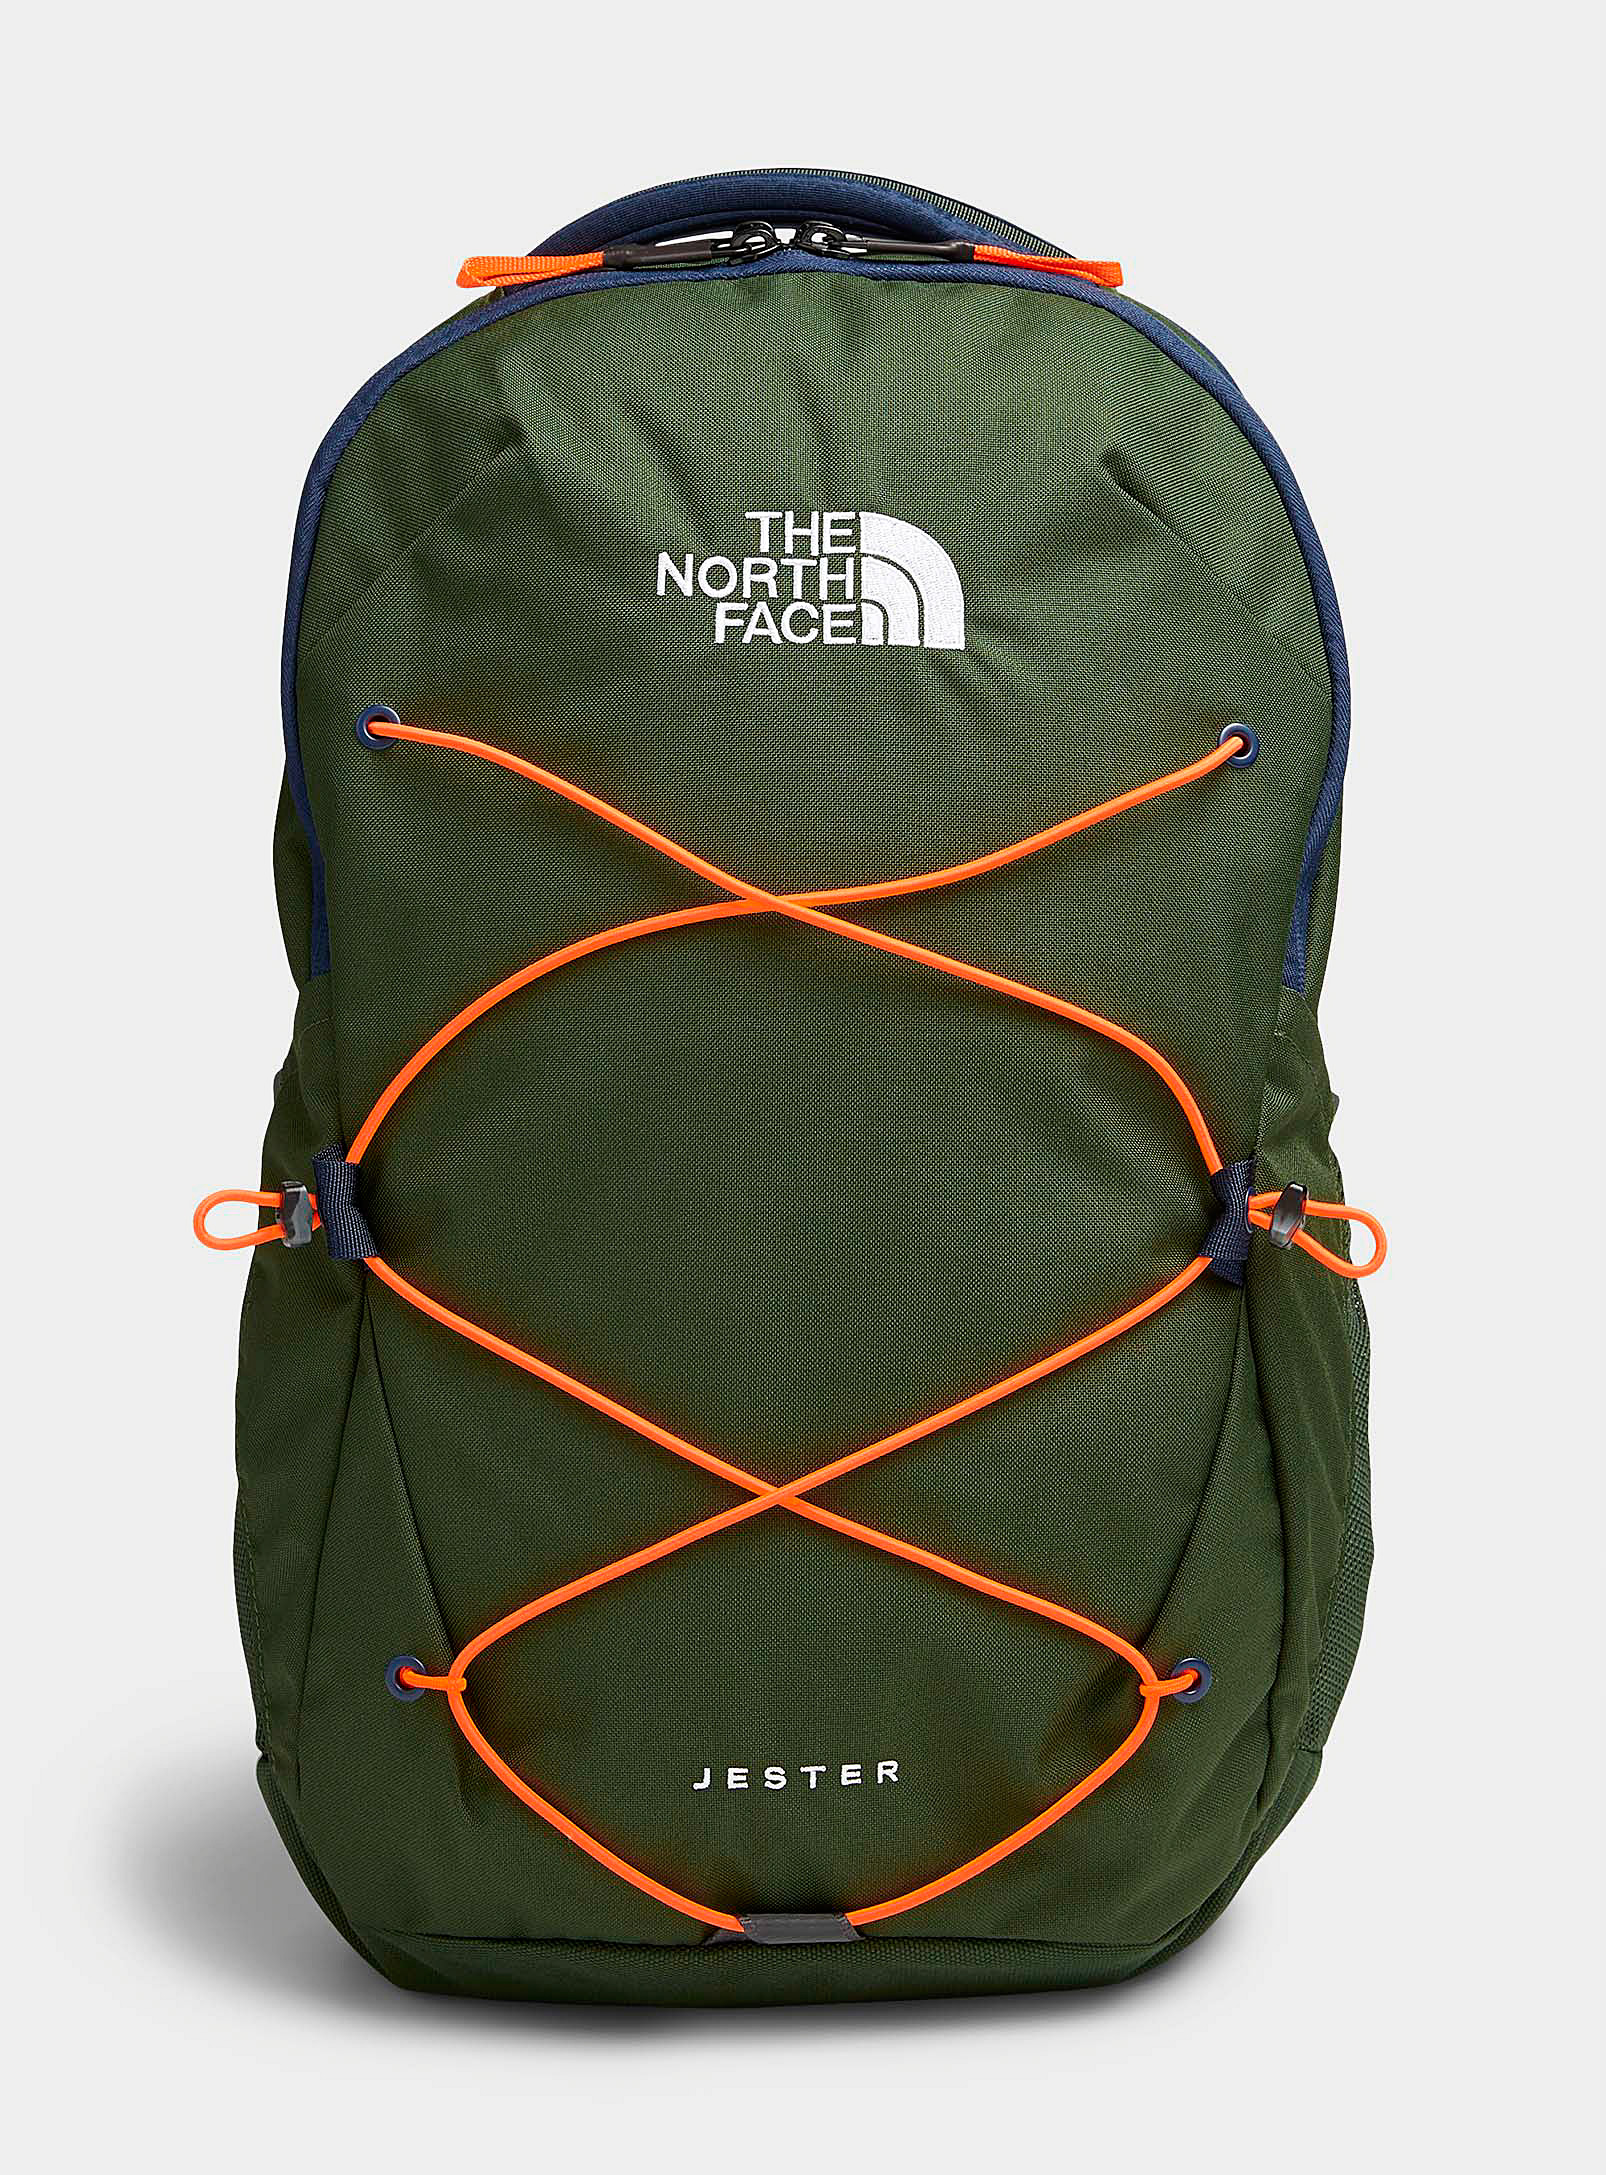 THE NORTH FACE JESTER BACKPACK